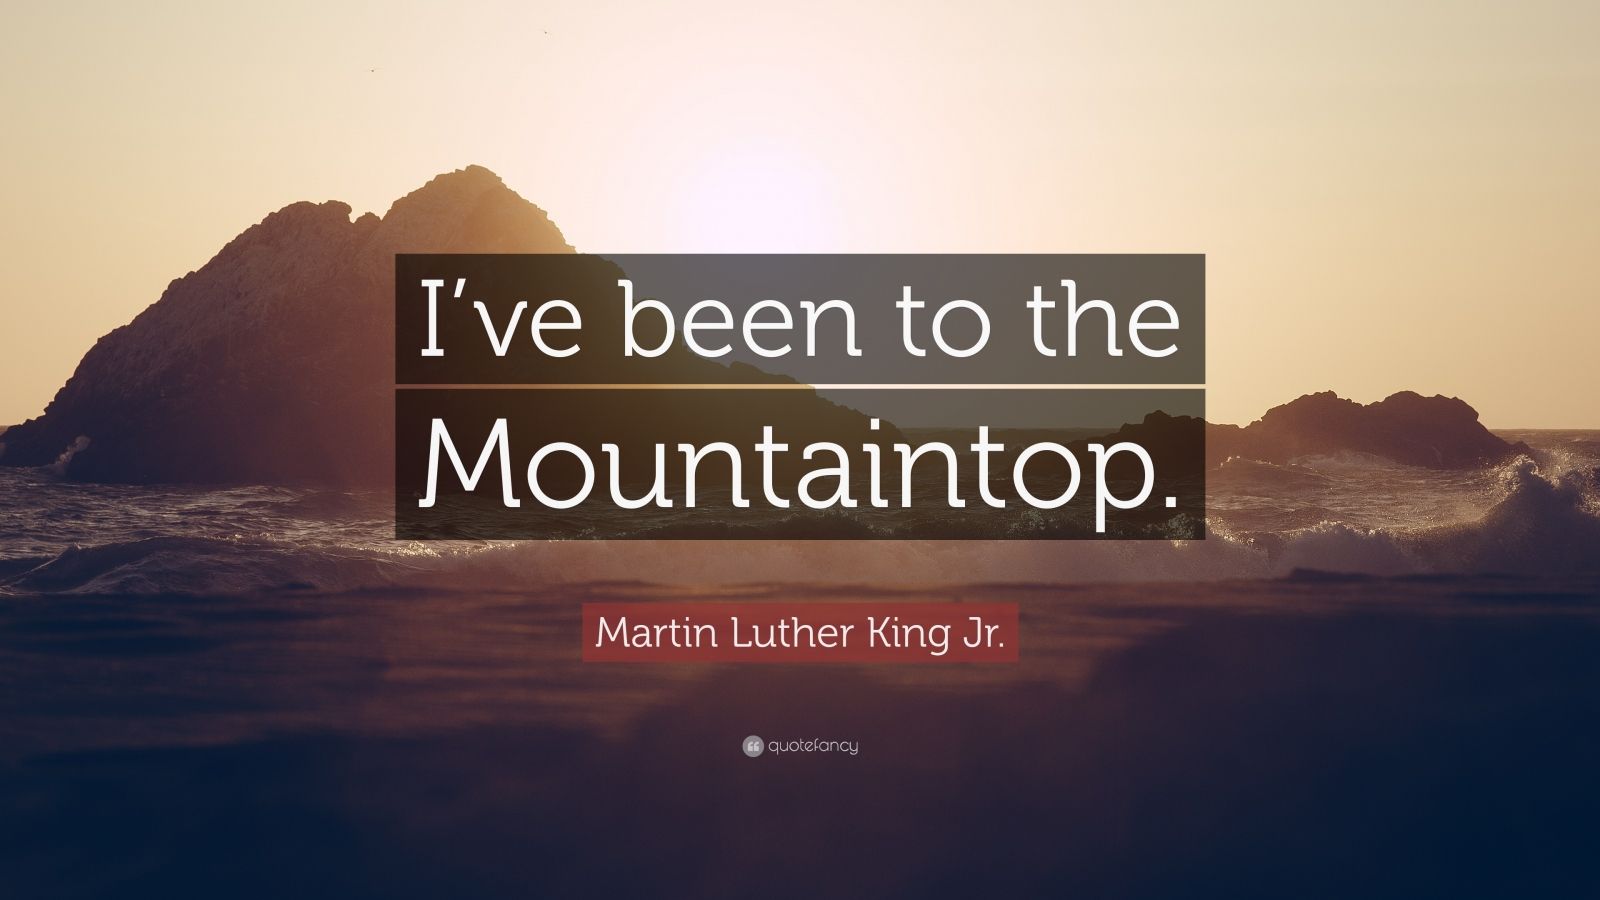 “I’ve been to the Mountaintop.”